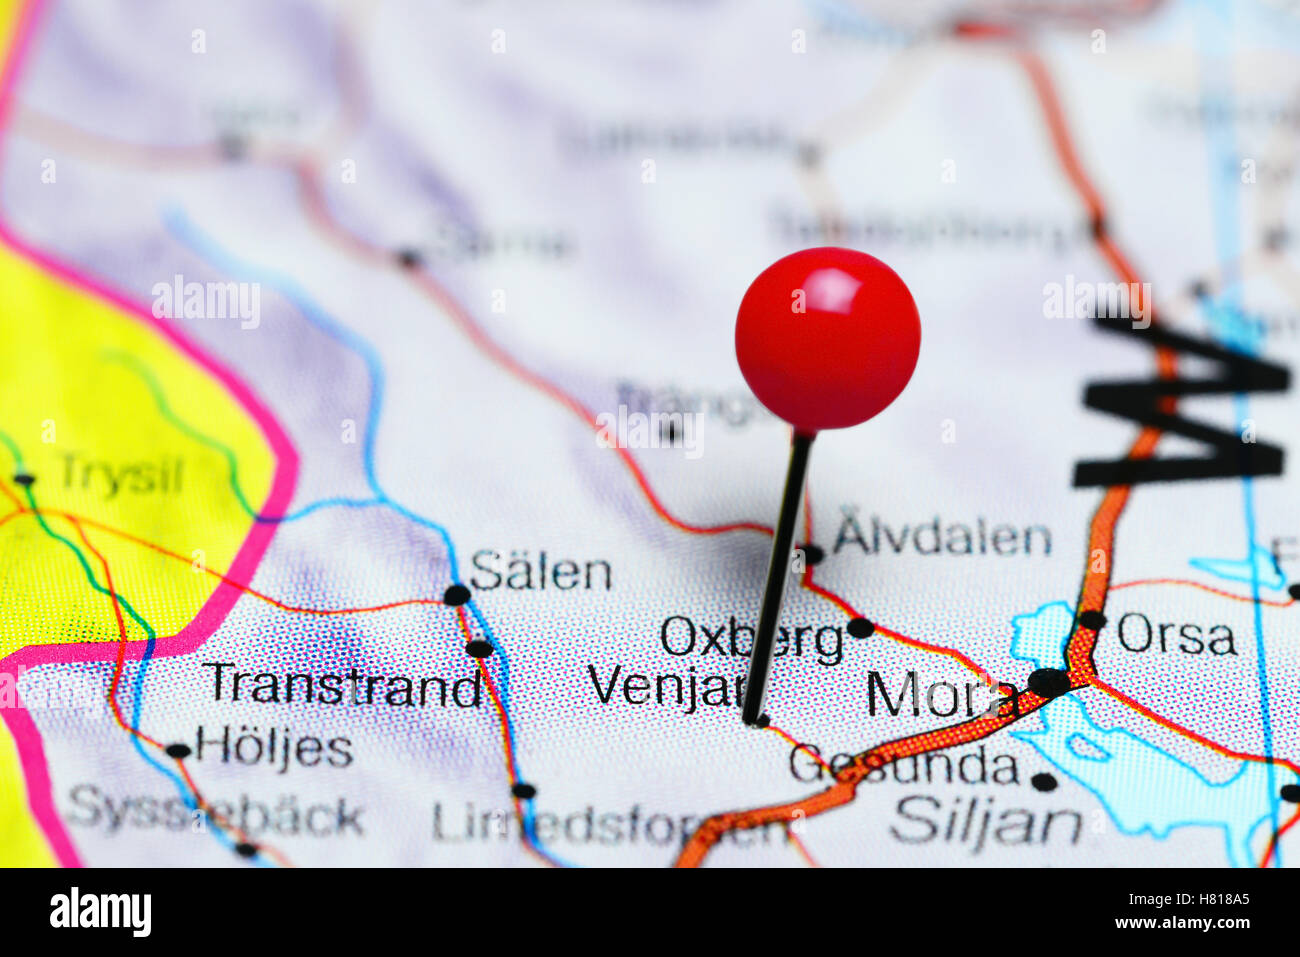 Venjar pinned on a map of Sweden Stock Photo